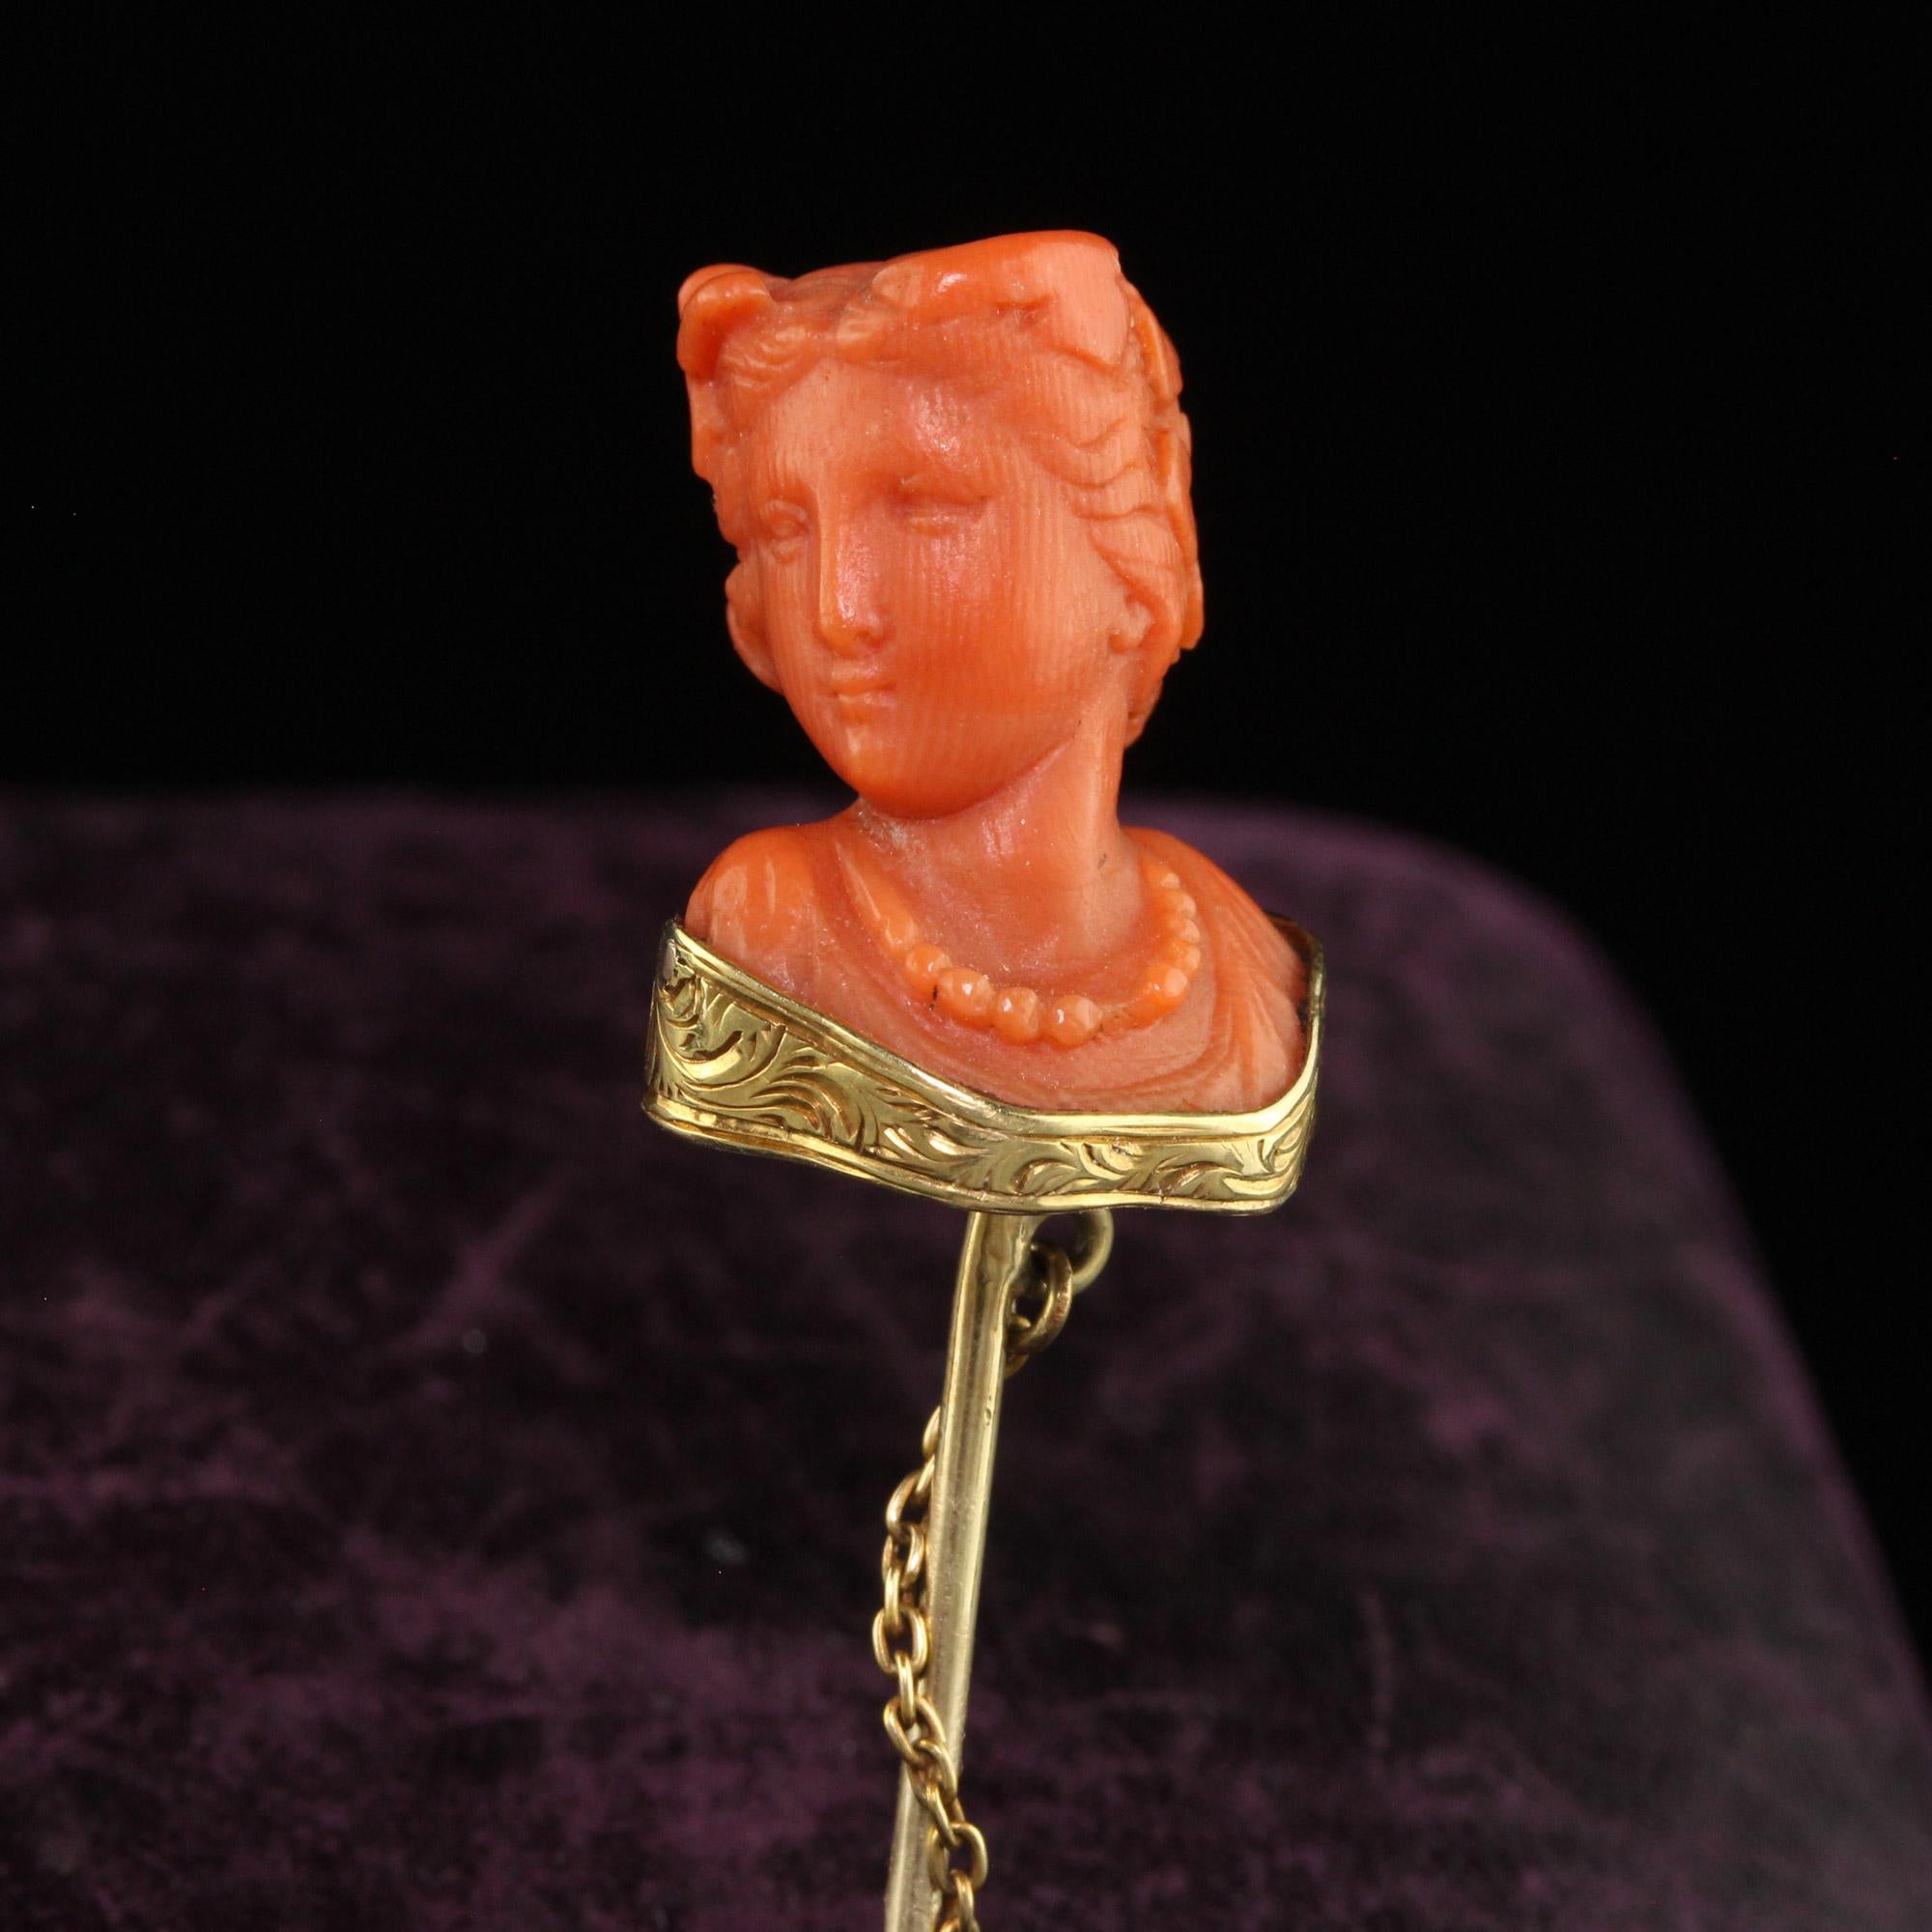 Beautiful Antique Victorian 14K Yellow Gold Carved Coral Lady Stick Pin. This incredible Victorian stick pin is crafted in 14k yellow gold. The pin features a lady's bust carved from natural coral in incredible detail. The coral has a beautiful